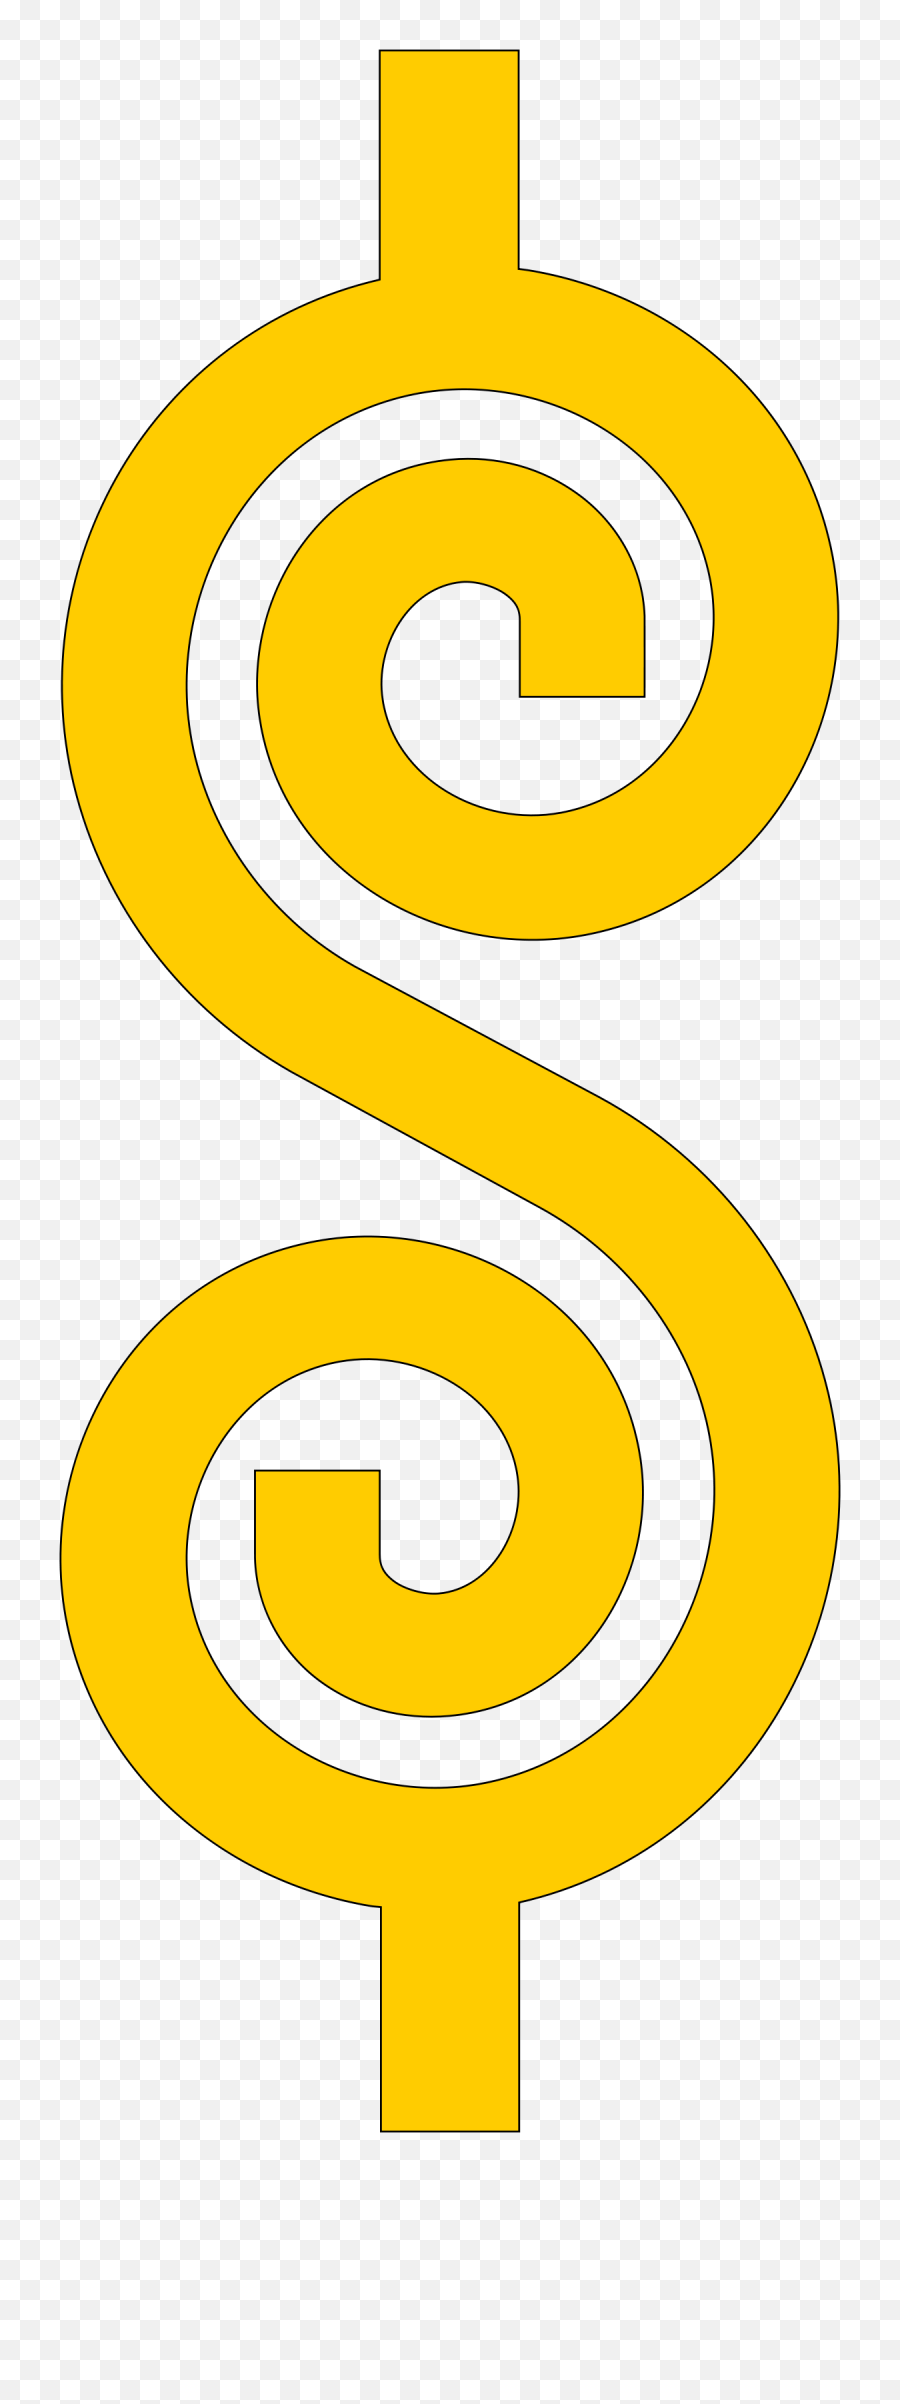 Dollar Sign Photos - Clipartsco Price Is Right S Png,Dollar Sign Icon Transparent Background